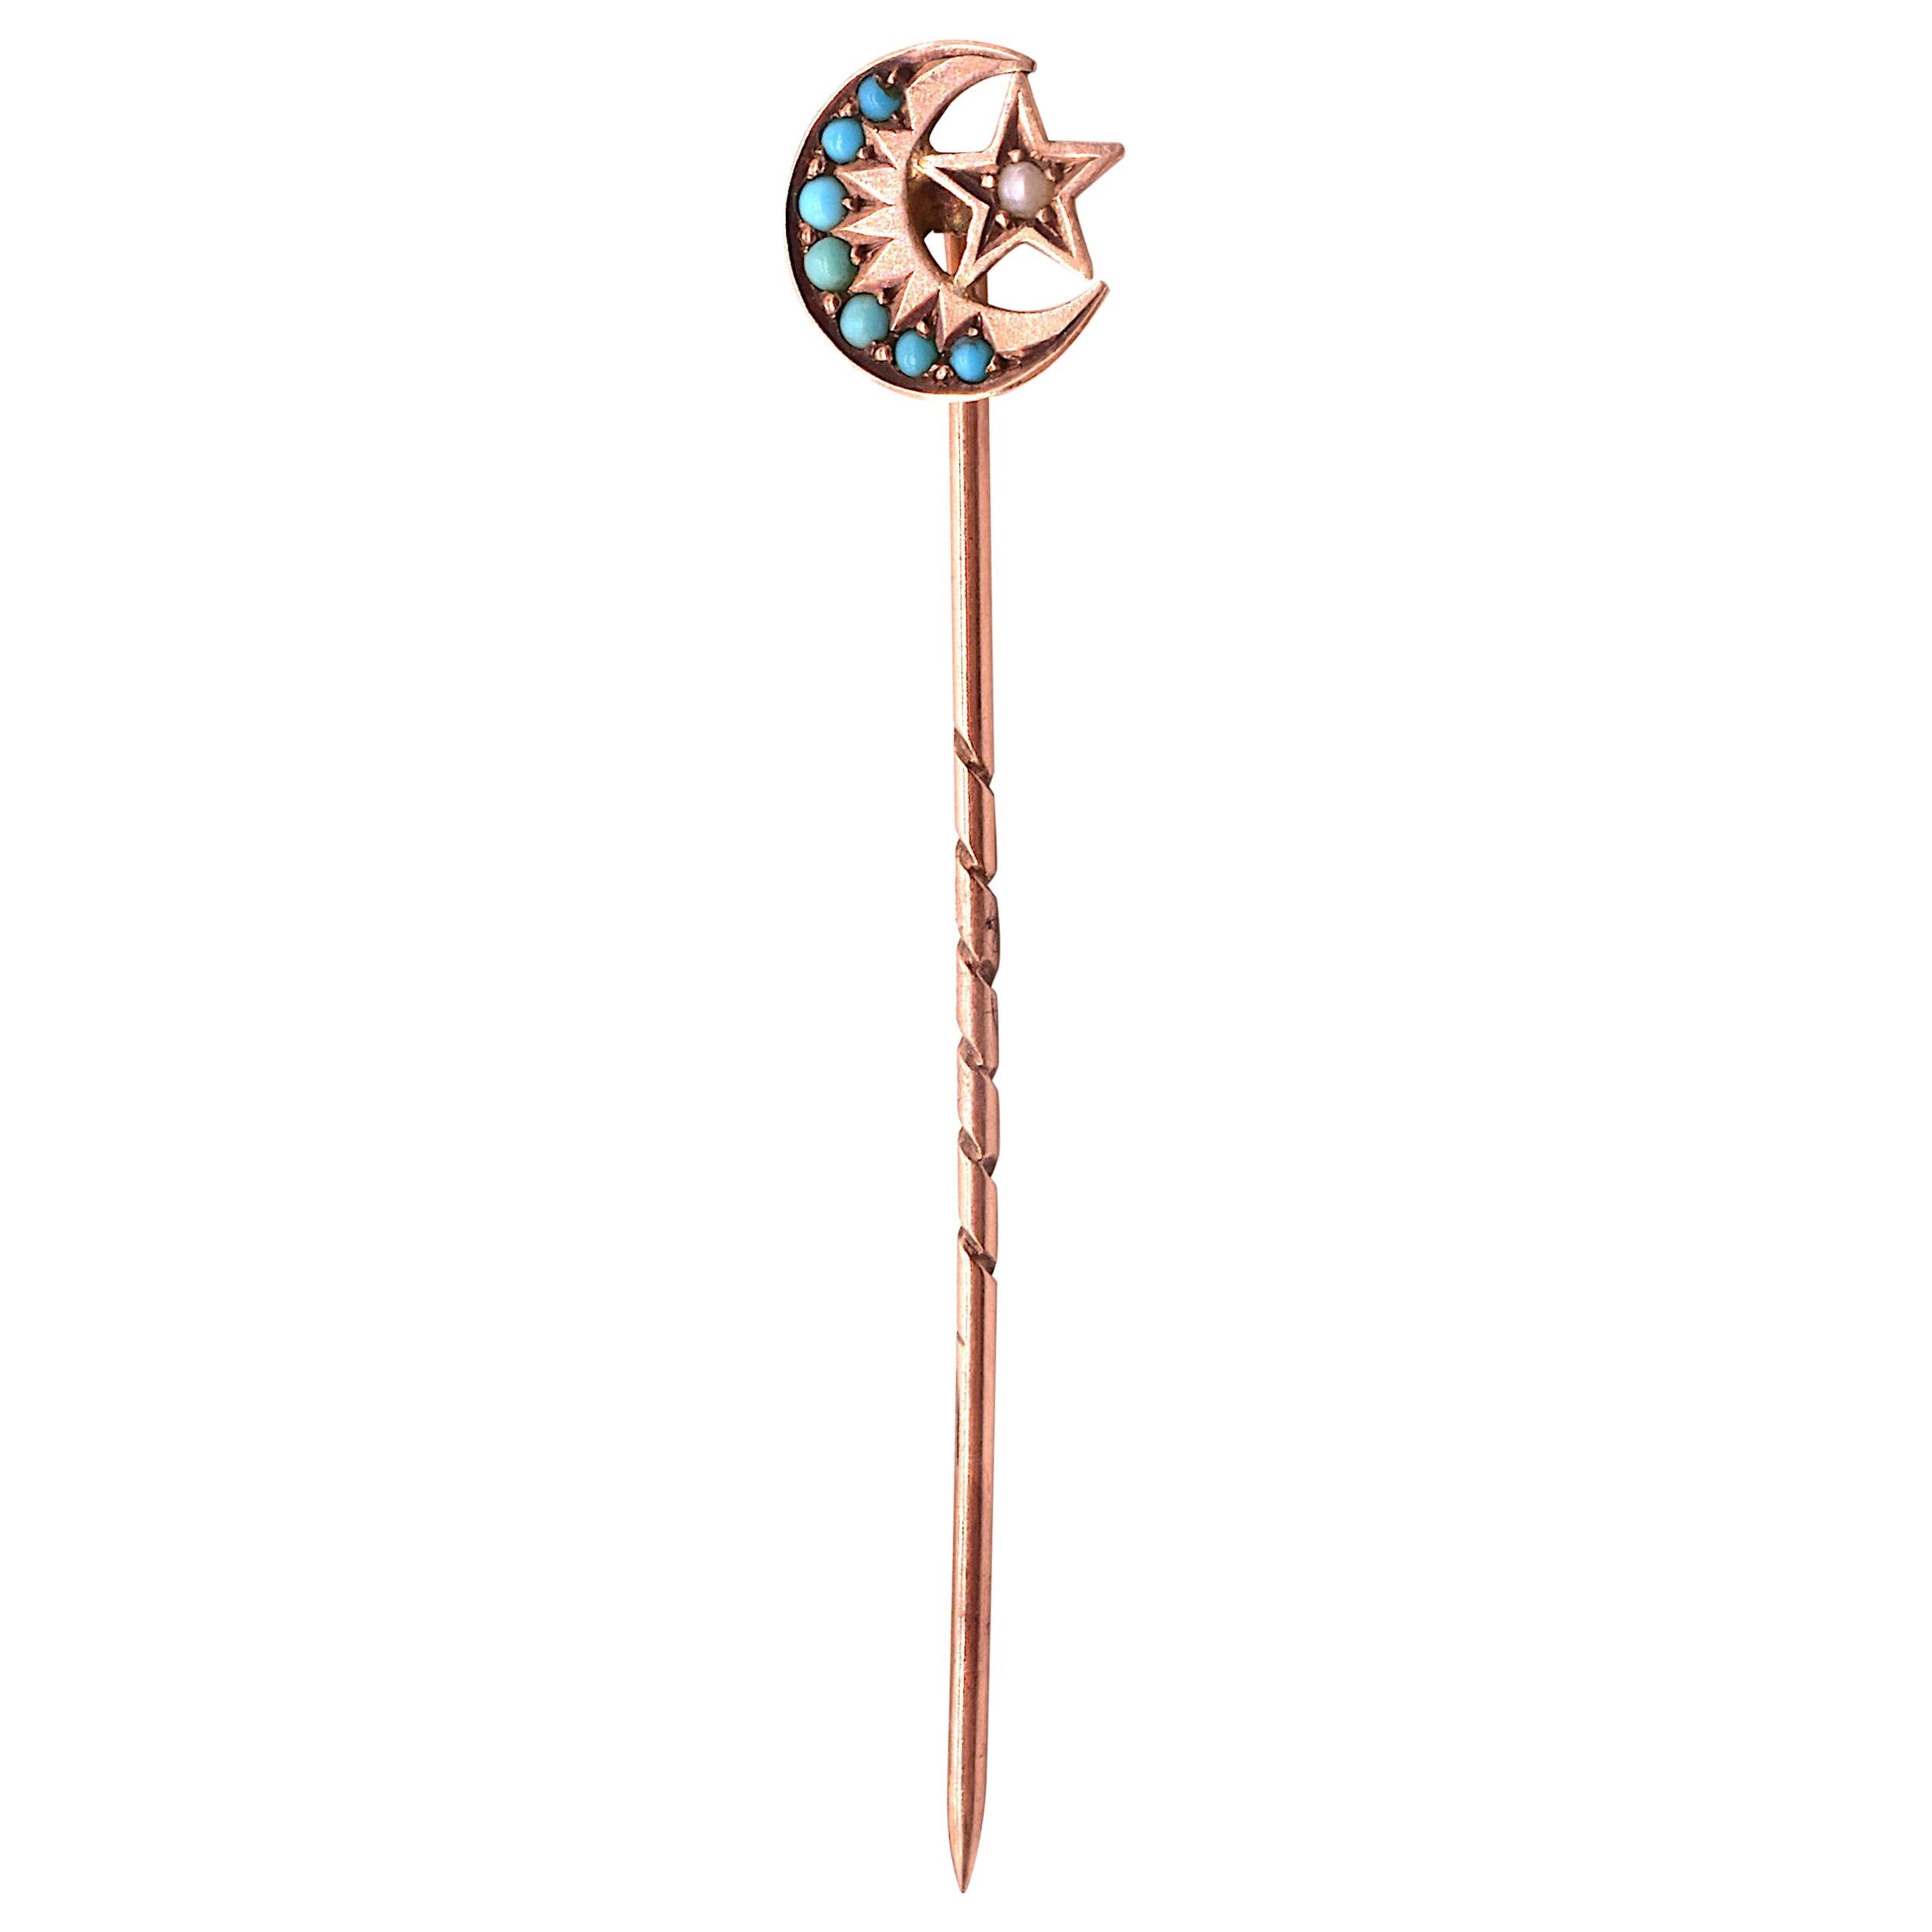 Sun Moon and Star Turquoise and Pearl Stick Pin HM 1902, 9 Karat Gold